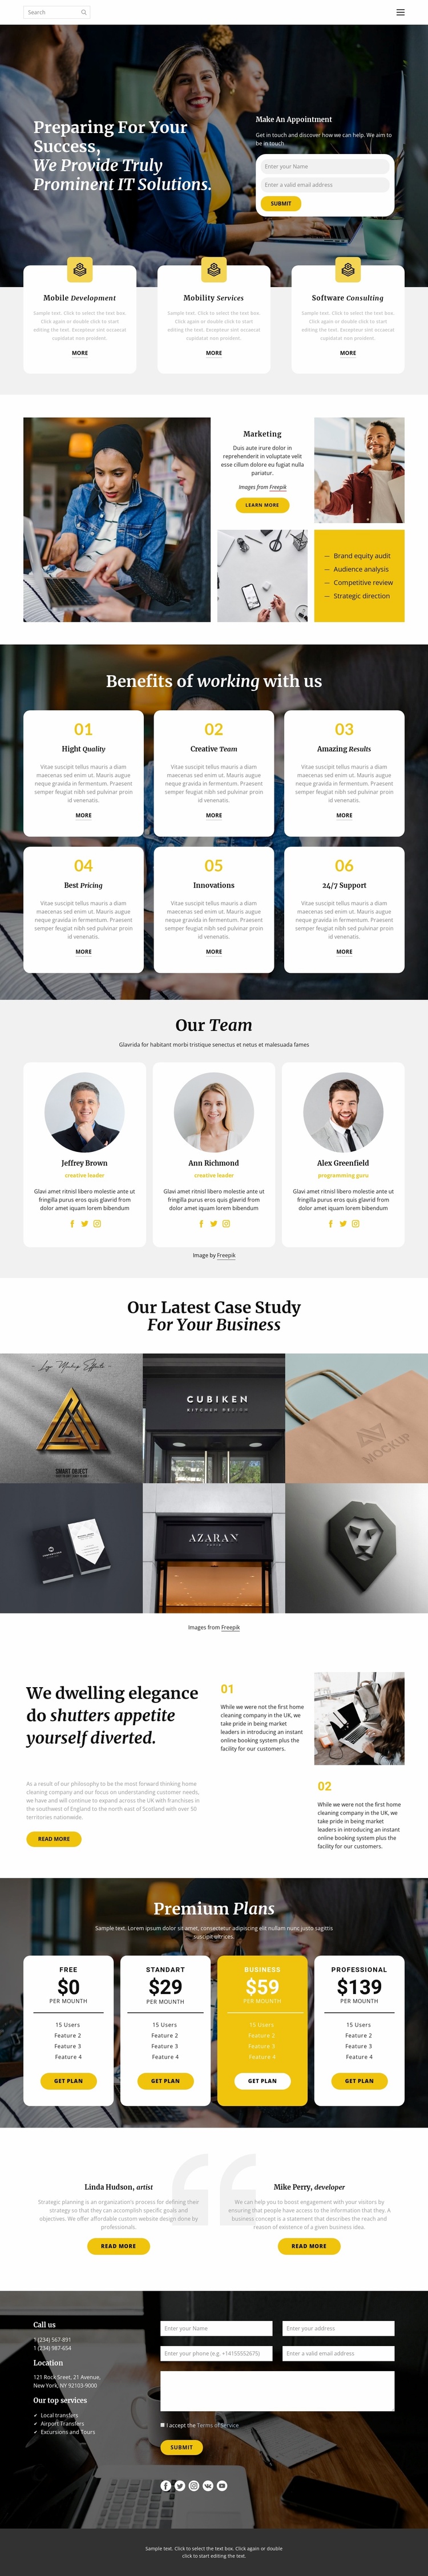 Joint-stock company Website Template